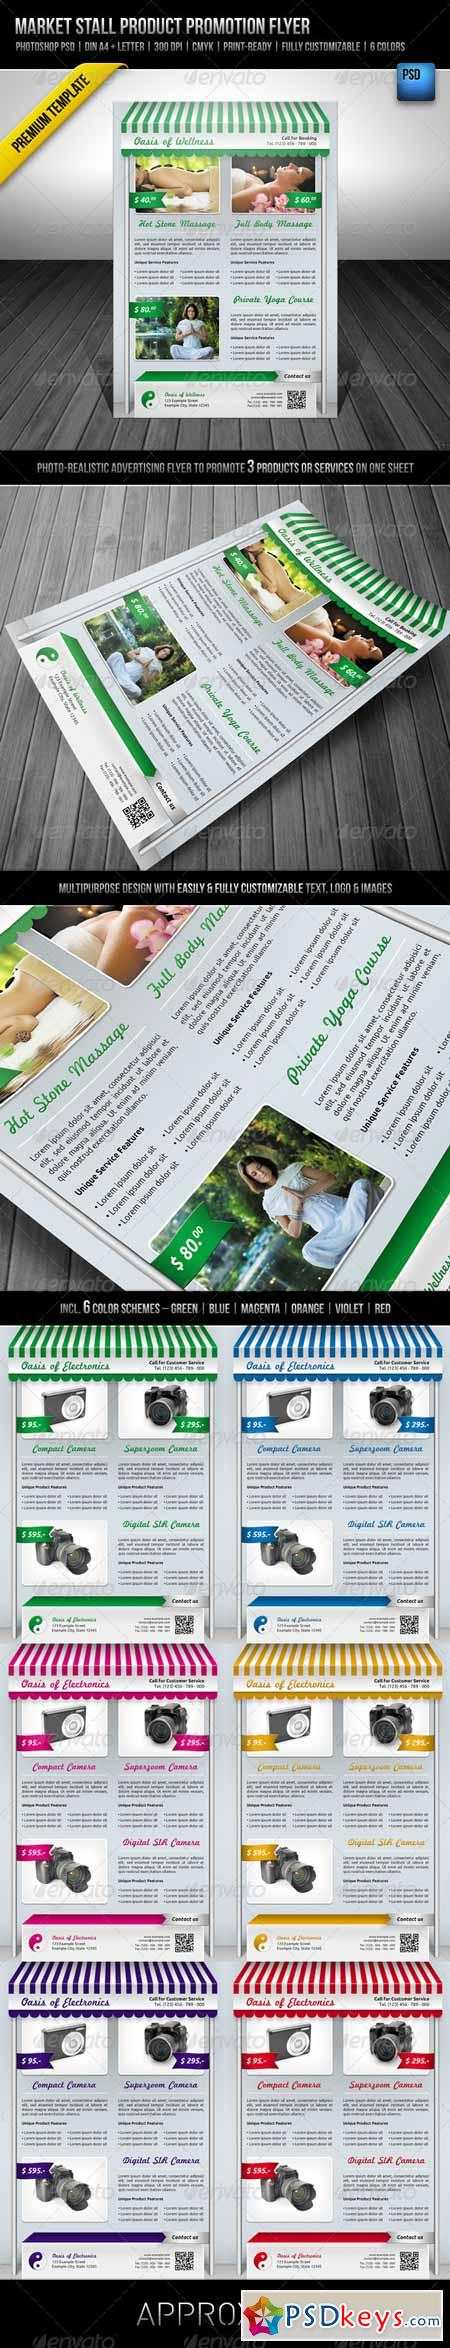 Market Stall Product Promotion Flyer 2295267